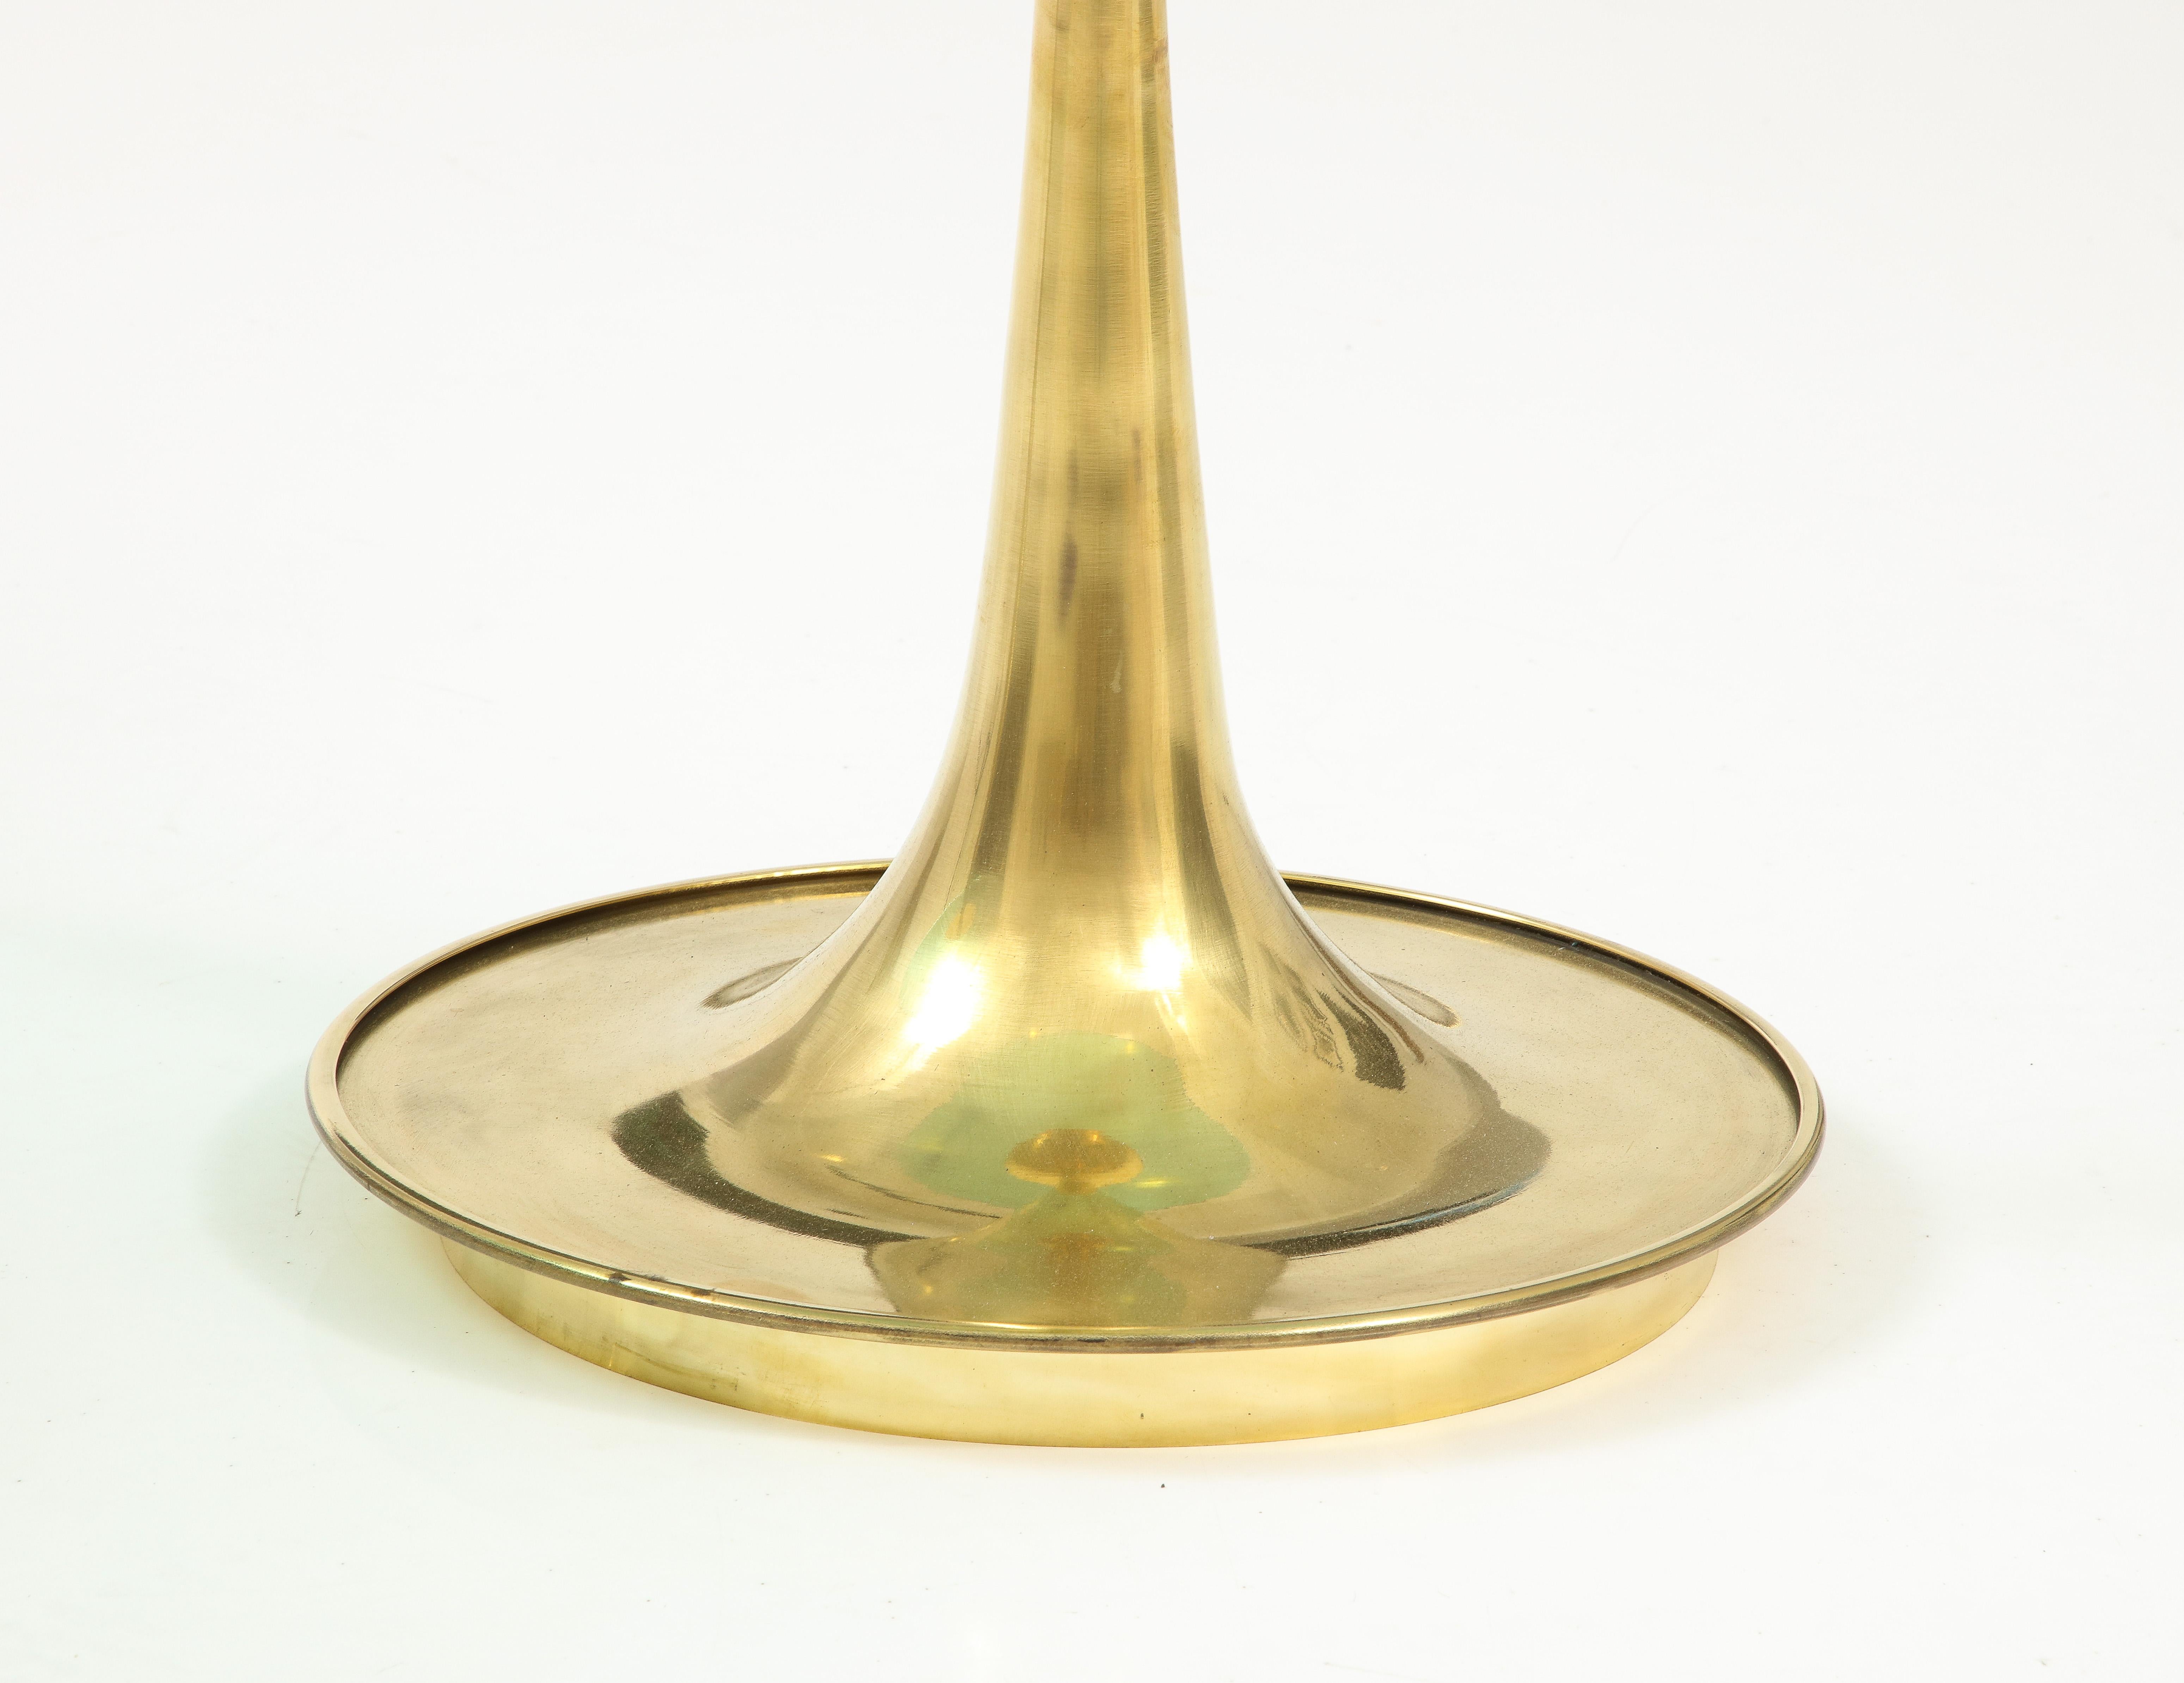 Round Soft Green Murano Glass and Brass Martini or Side Table, Italy, 20.75